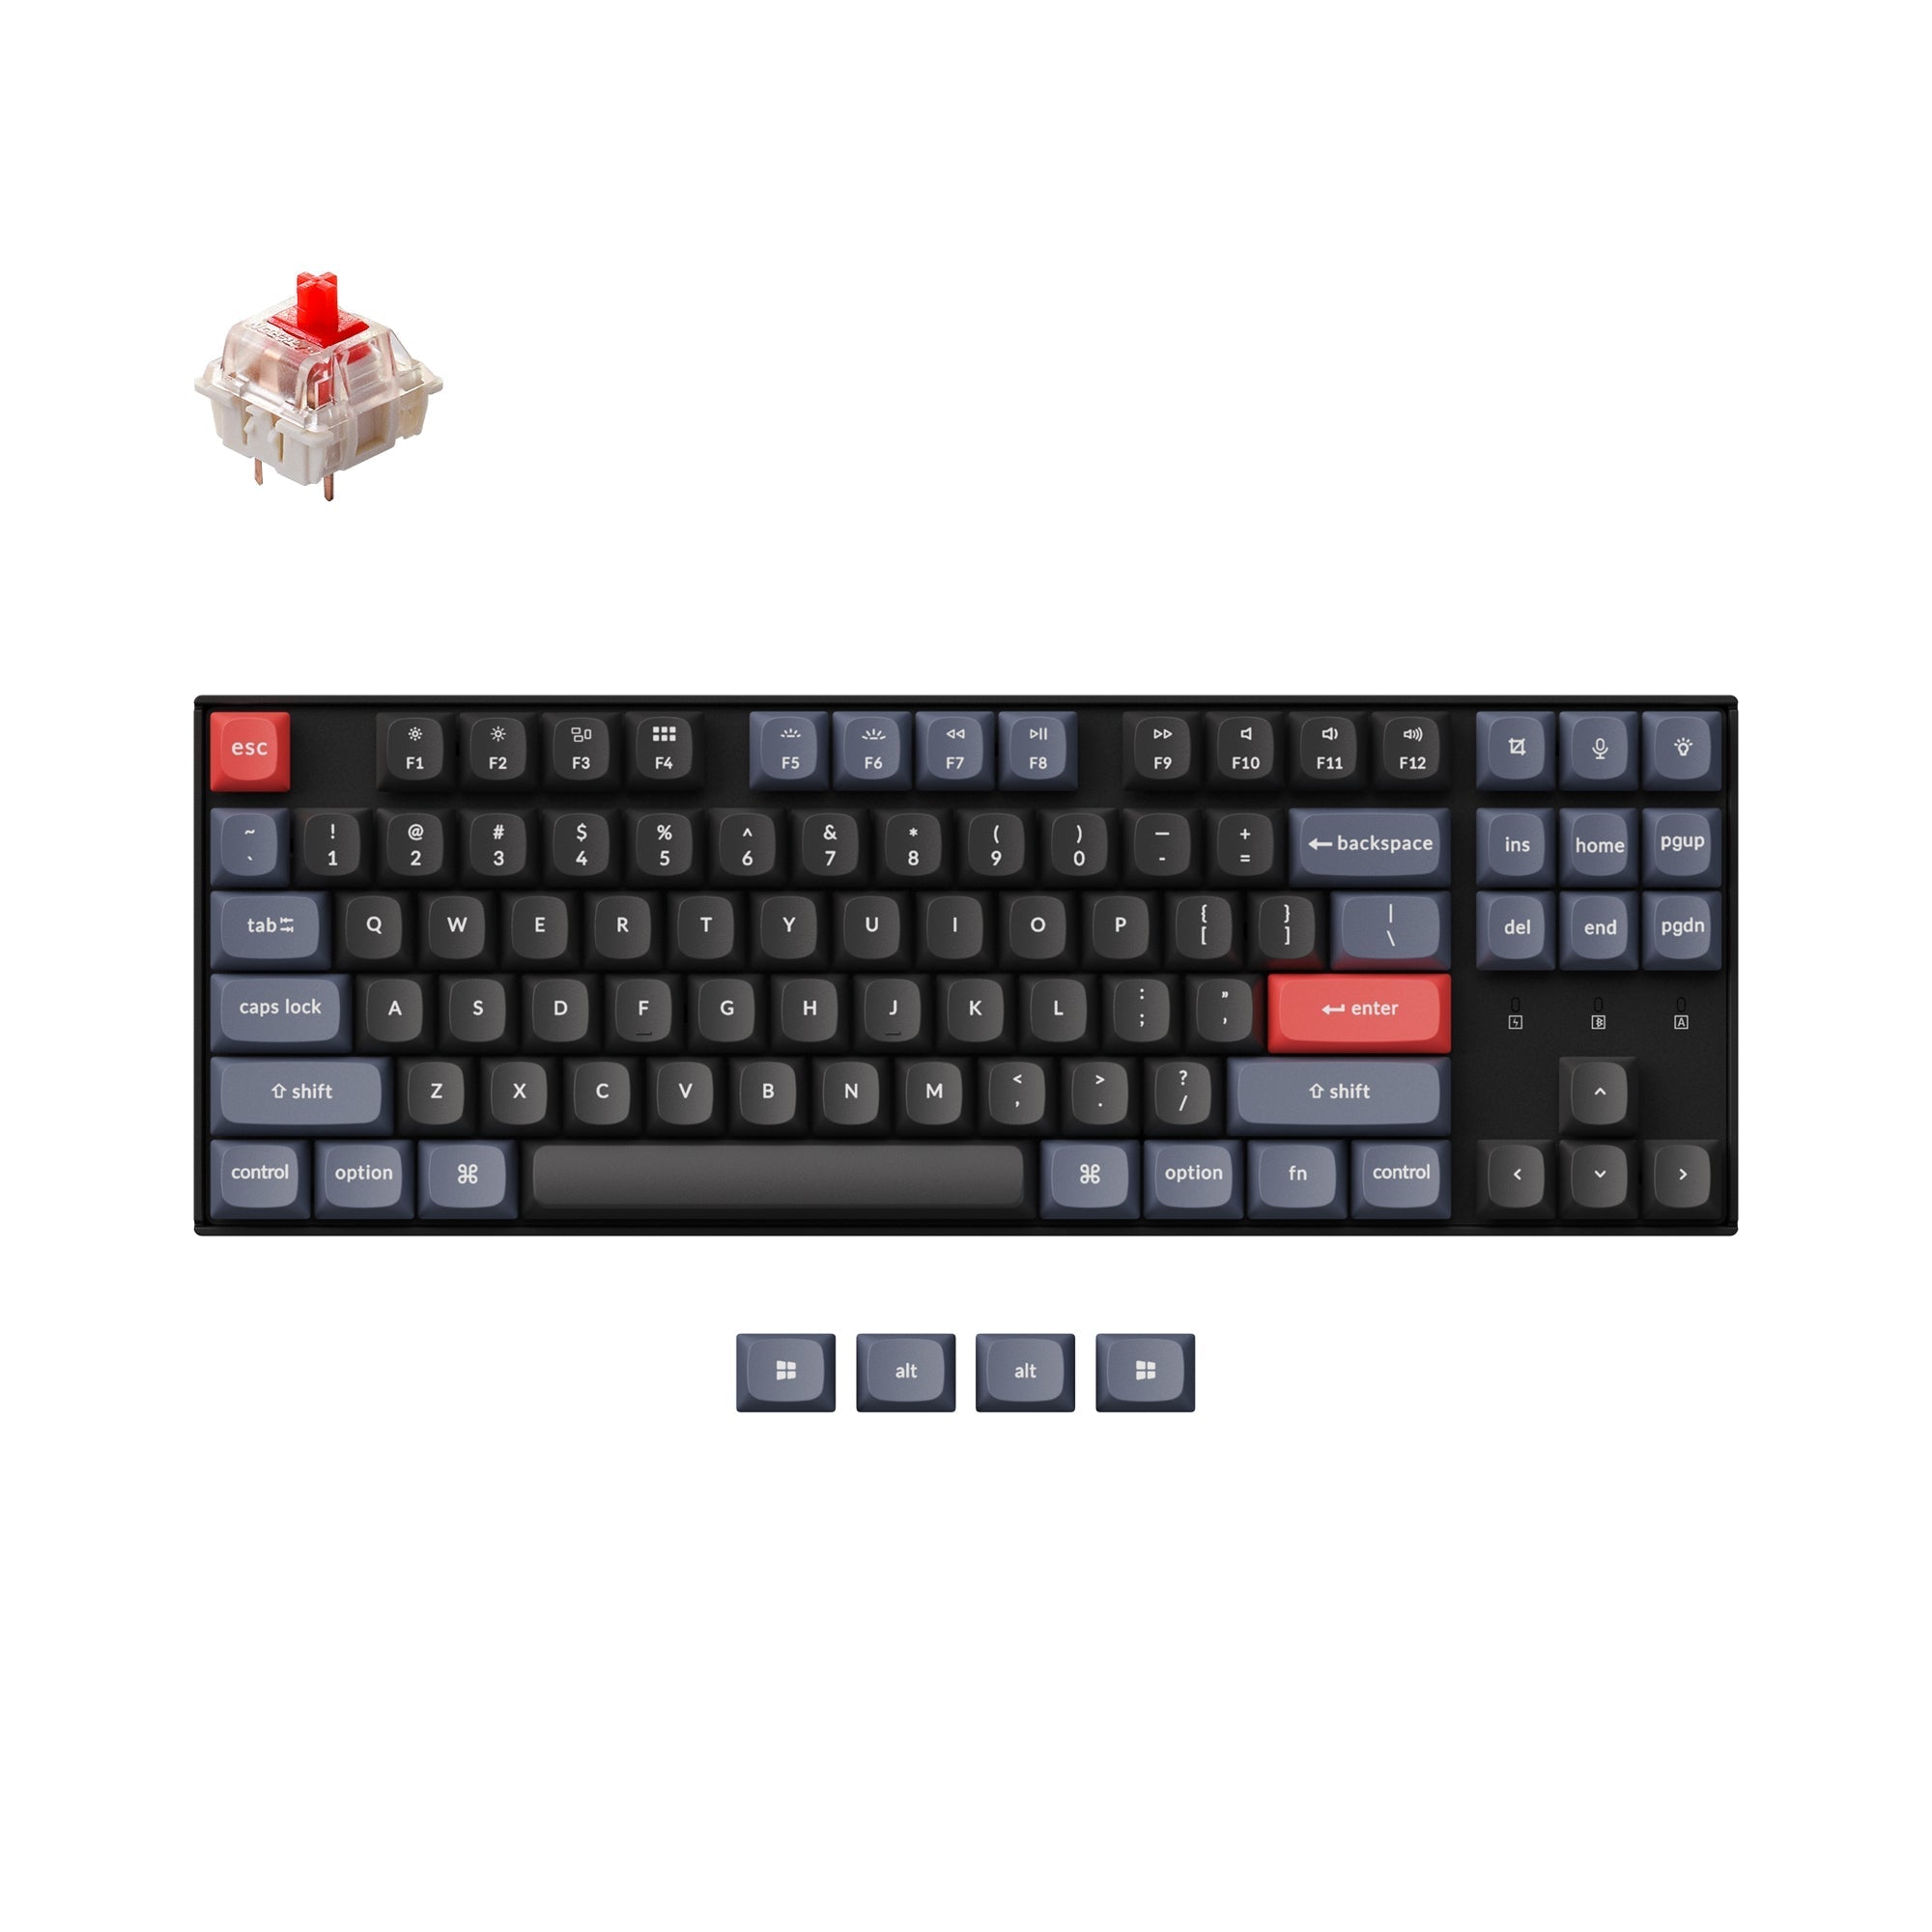 Keychron K8 Pro QMK/VIA Wireless Mechanical Keyboard for Mac and Windows PBT keycaps with PCB screw-in stabilizer and hot-swappable Gateron G Pro mechanical red switch